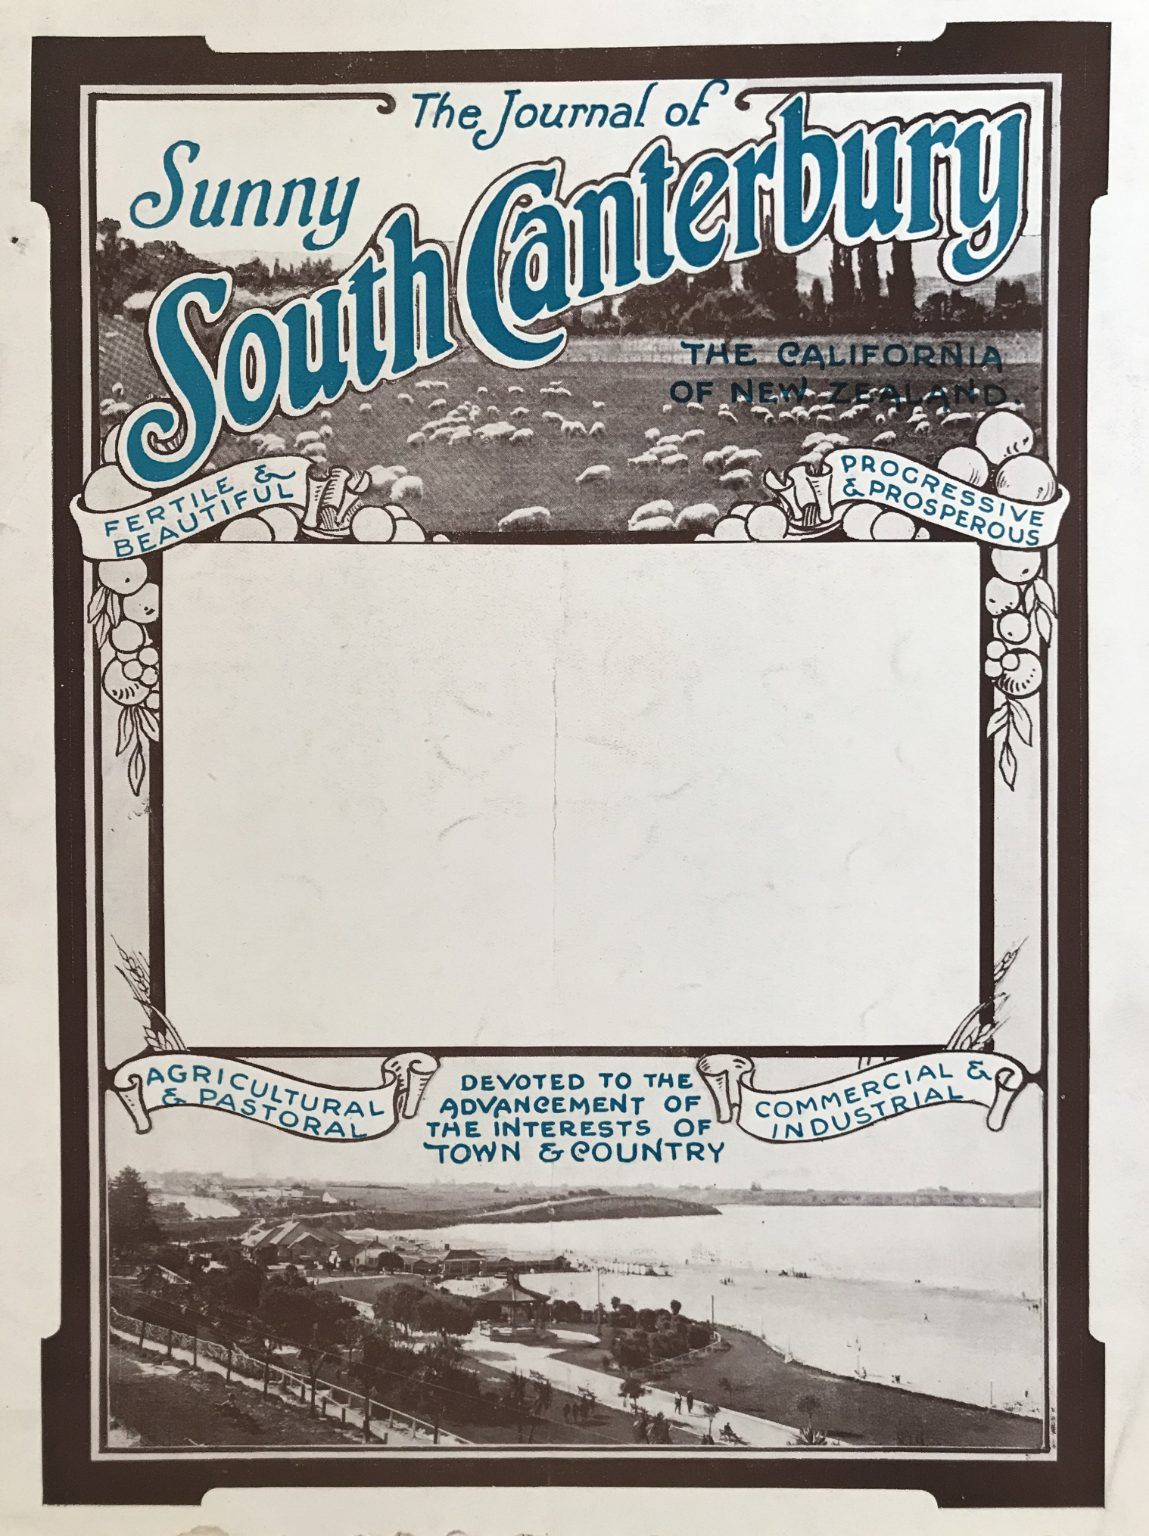 THE JOURNAL OF SUNNY SOUTH CANTERBURY: January 1926